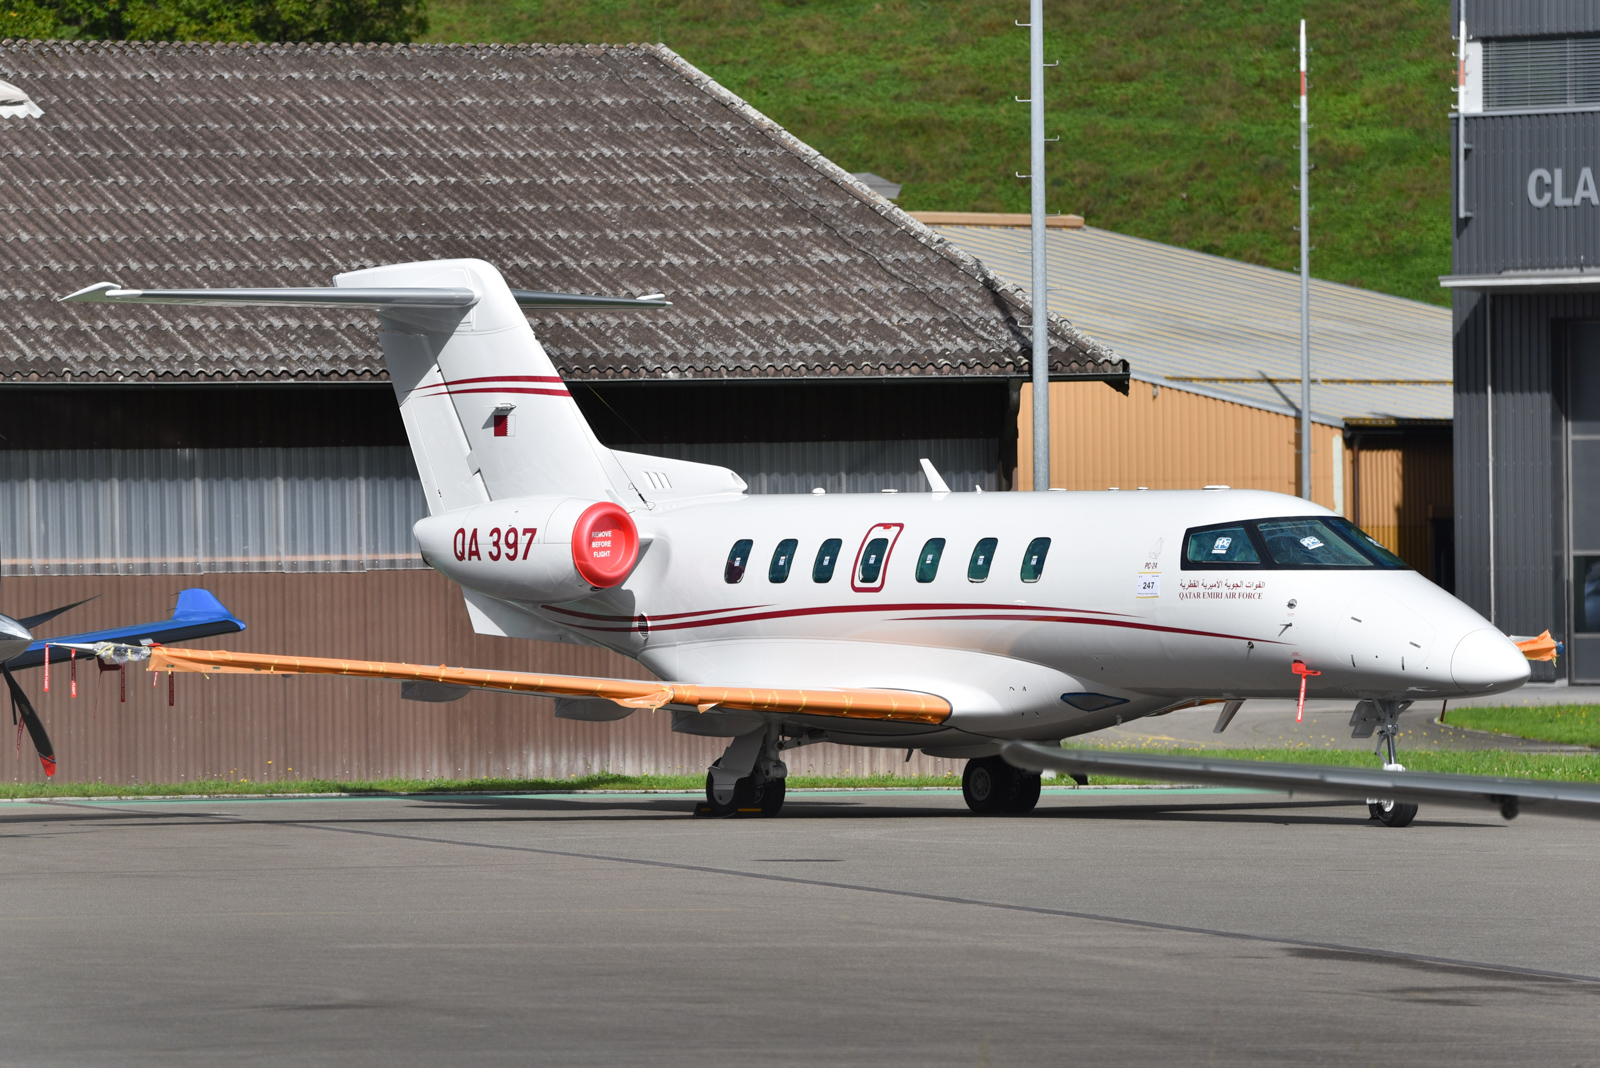 Seen on 28th October in Stans: the first PC-24 for the Qatar Emiri Air Force (sn 247, QA 397), temporarily registered as HB-VZA, on the way to a test flight.(the Flag of Qatar in the tail and the description "Qatar Emiri Air Force" under the cockpit window are covered) - see the second picture of the original aircraft, dated 29th September).